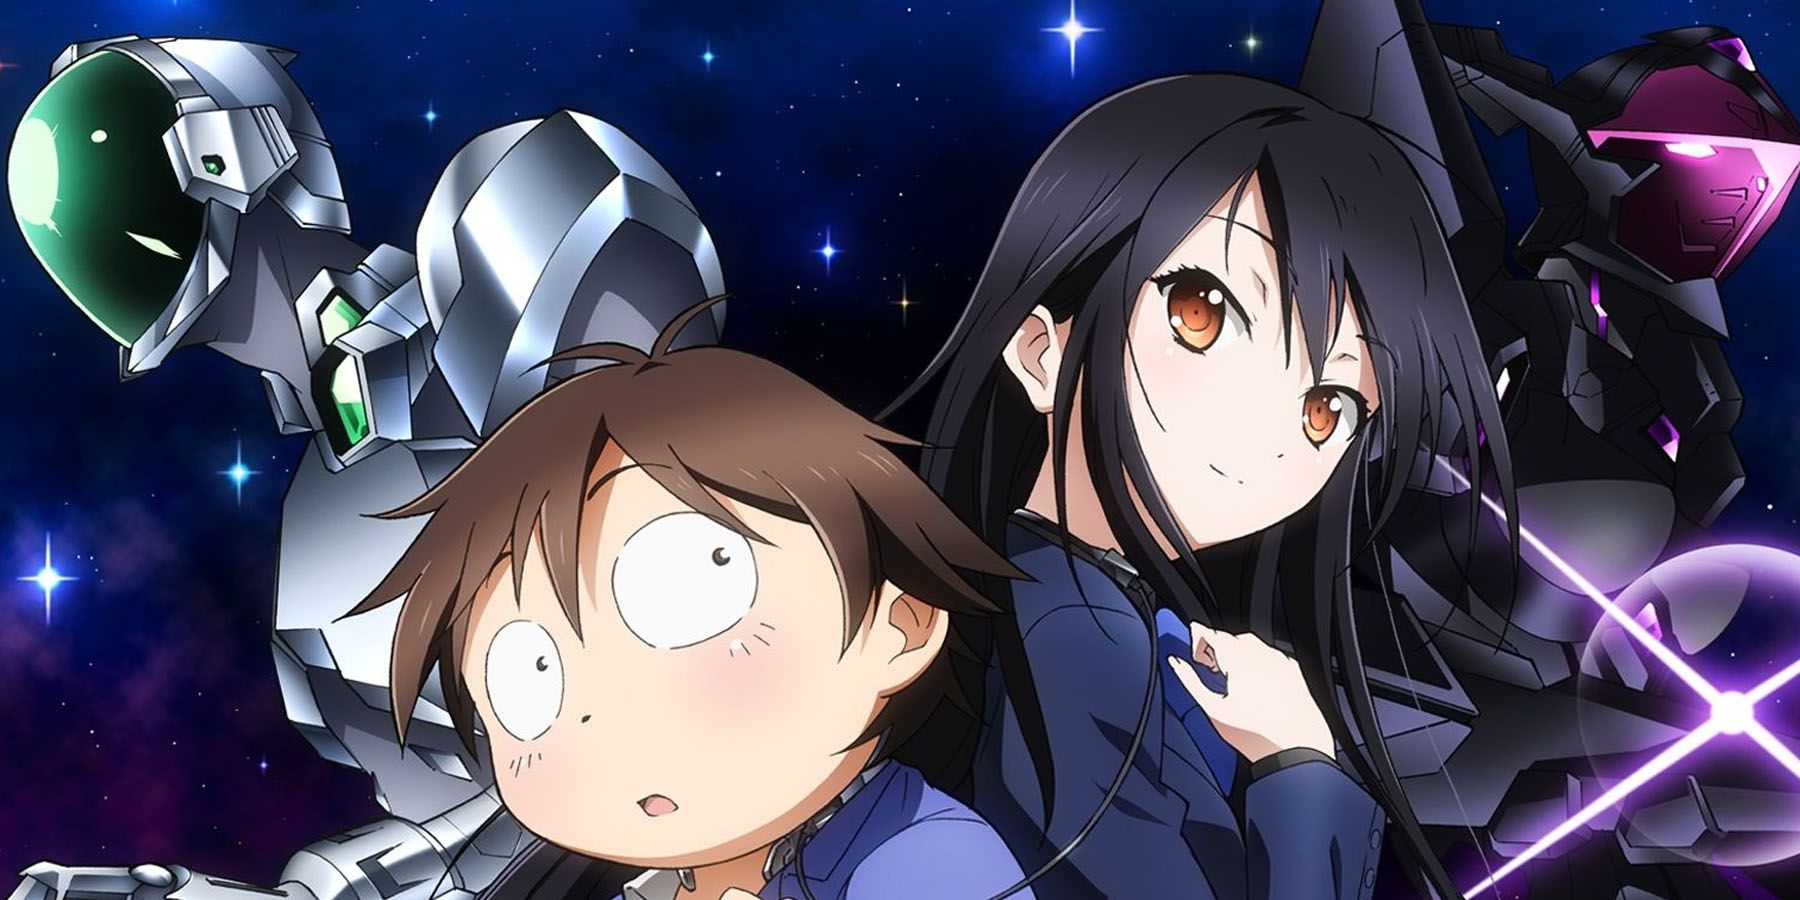 Main characters of Accel World